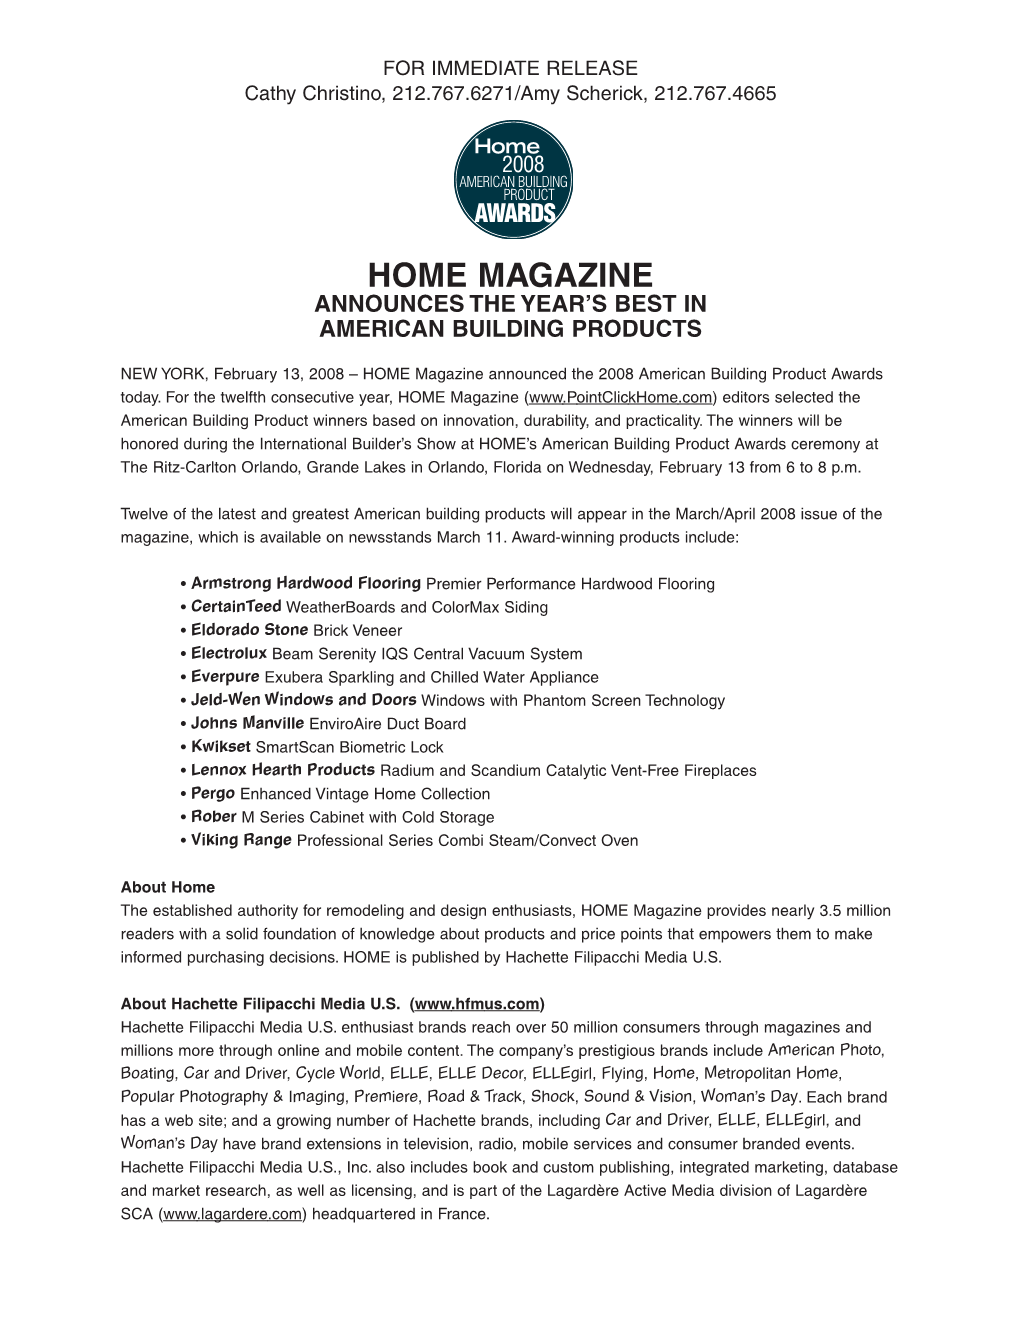 Home Magazine Announces the Year’S Best in American Building Products